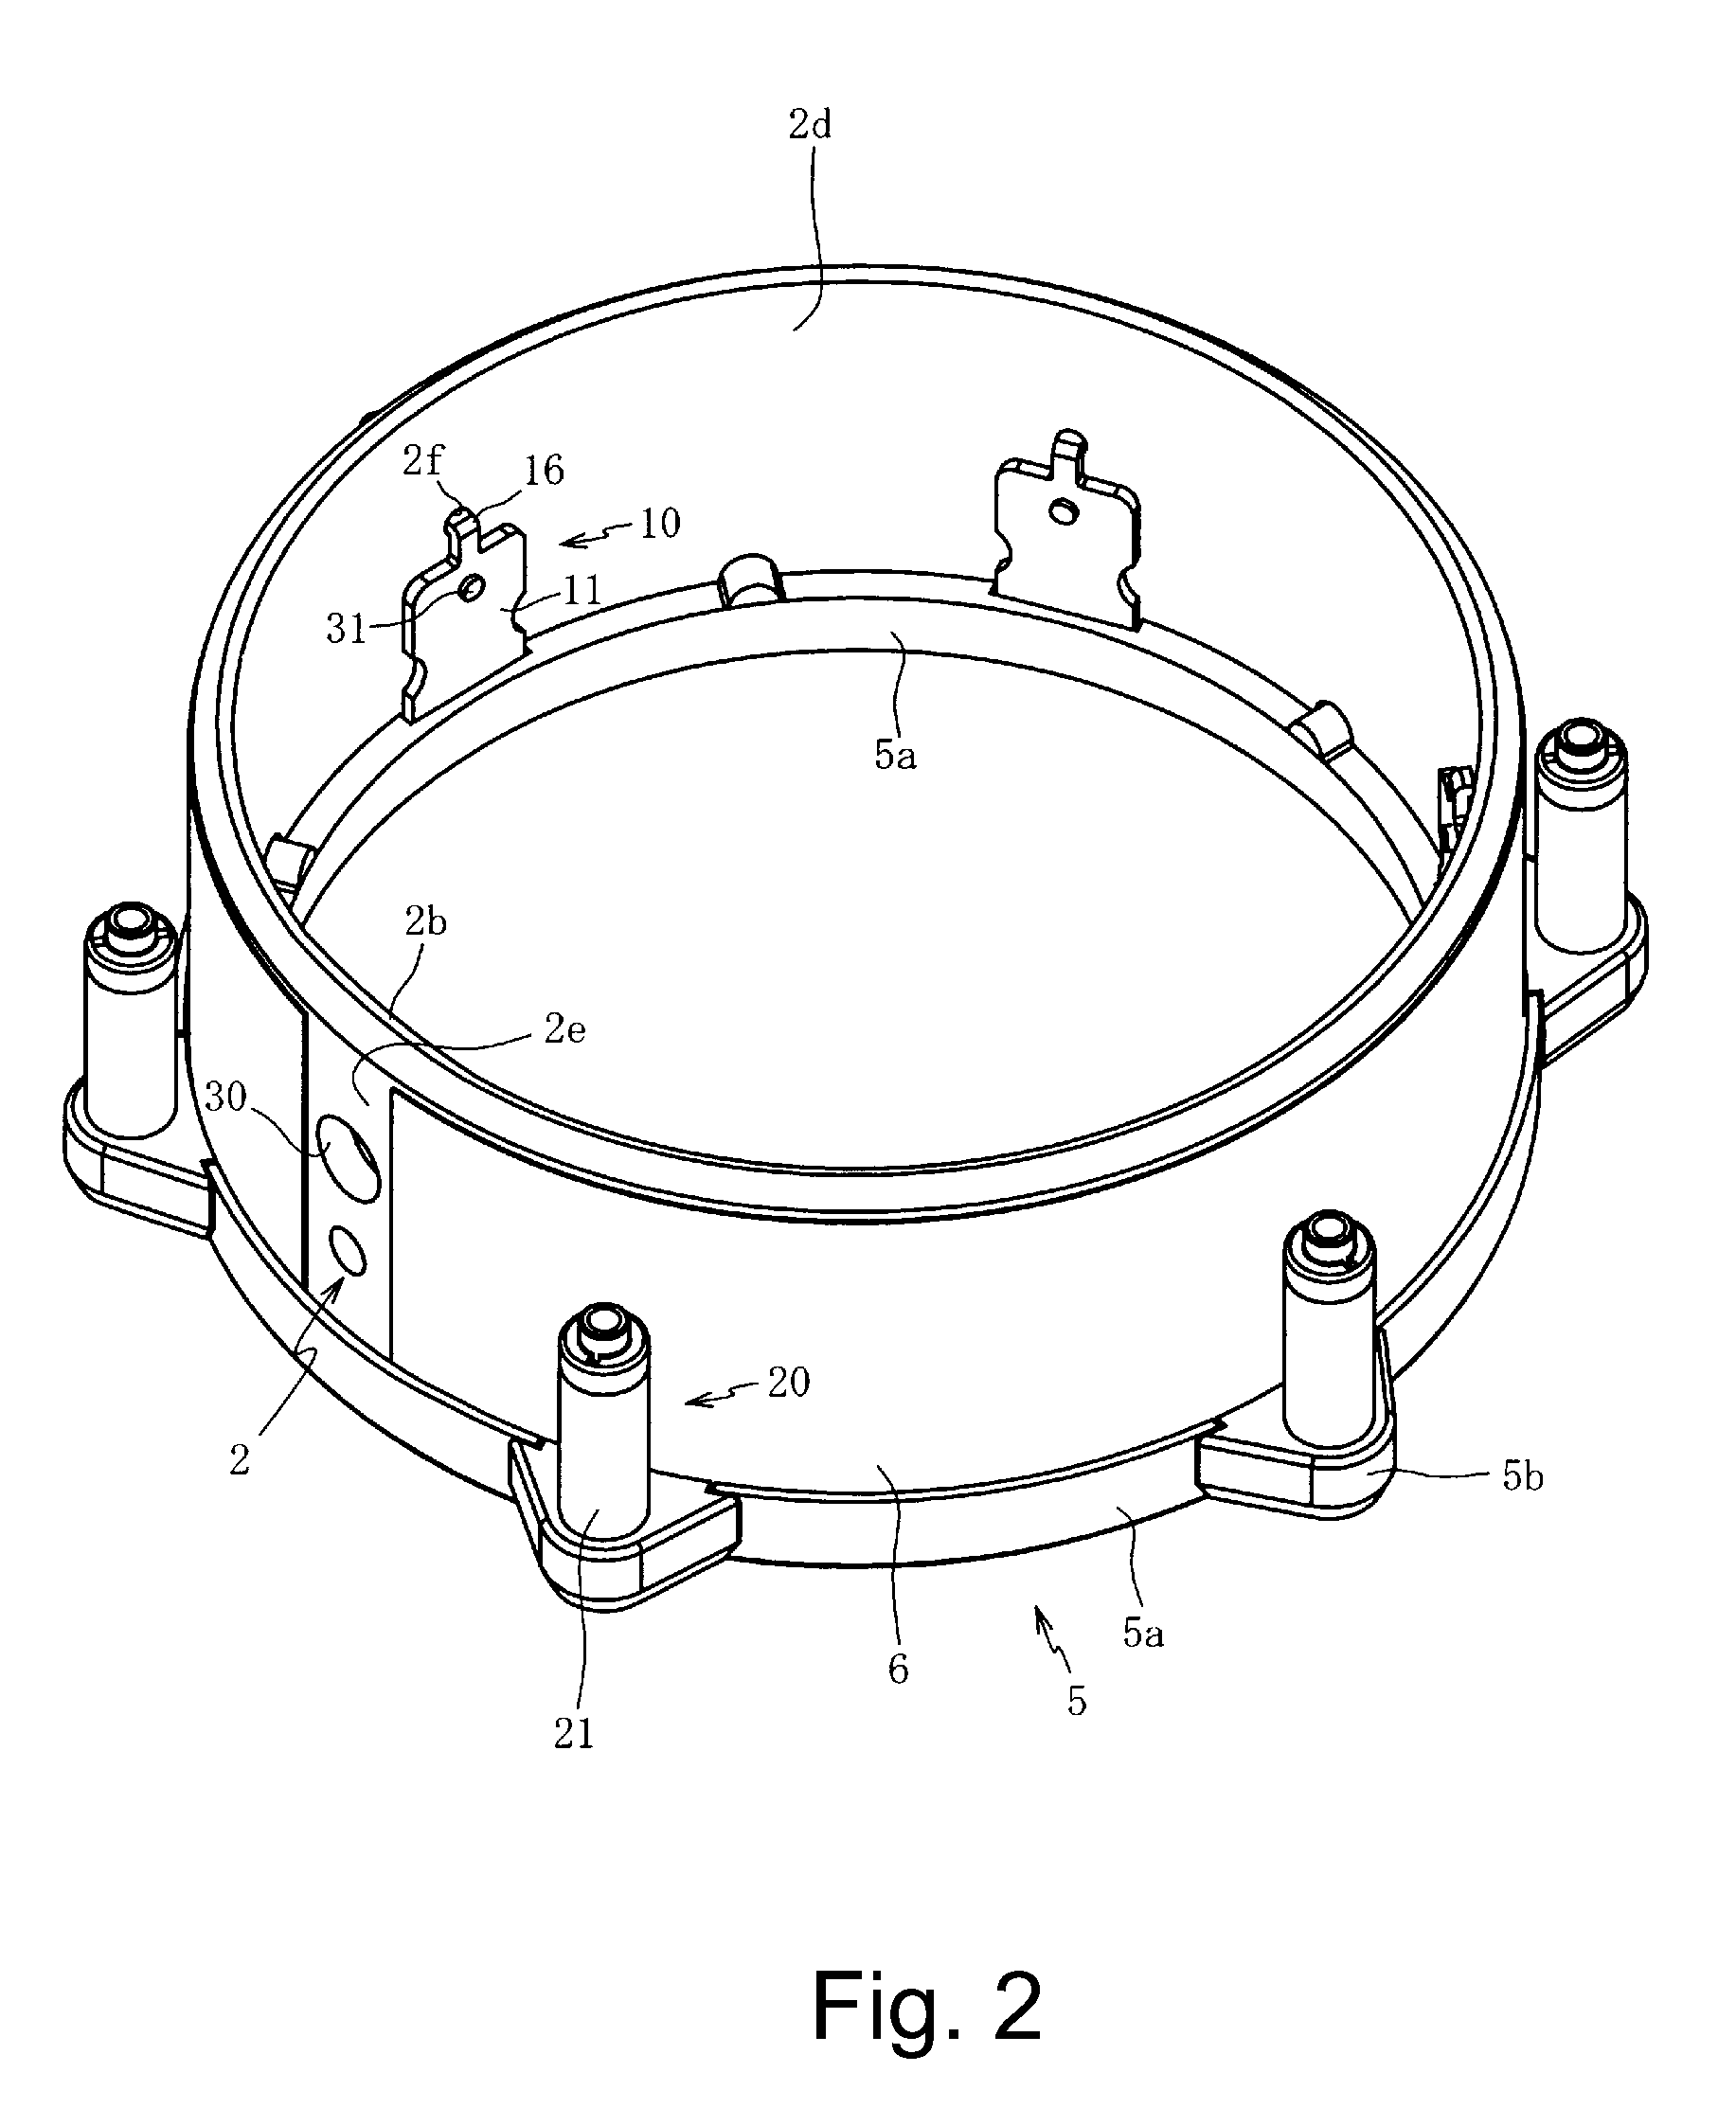 Percussion instrument systems and methods